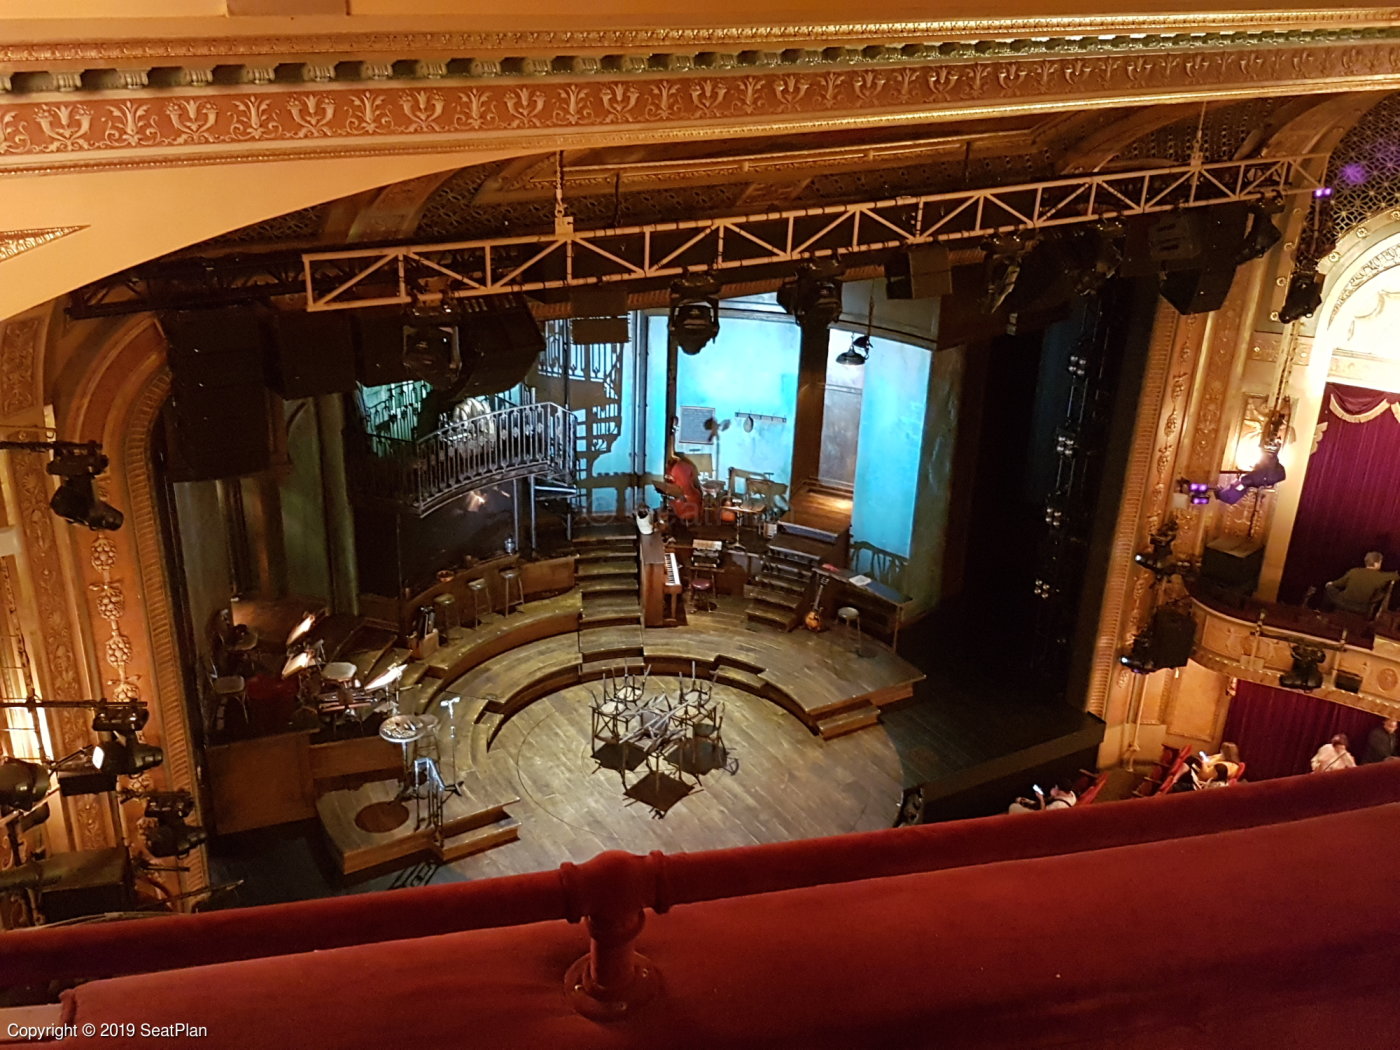 Walter Kerr Theatre Seating Chart & View From Seat New York SeatPlan